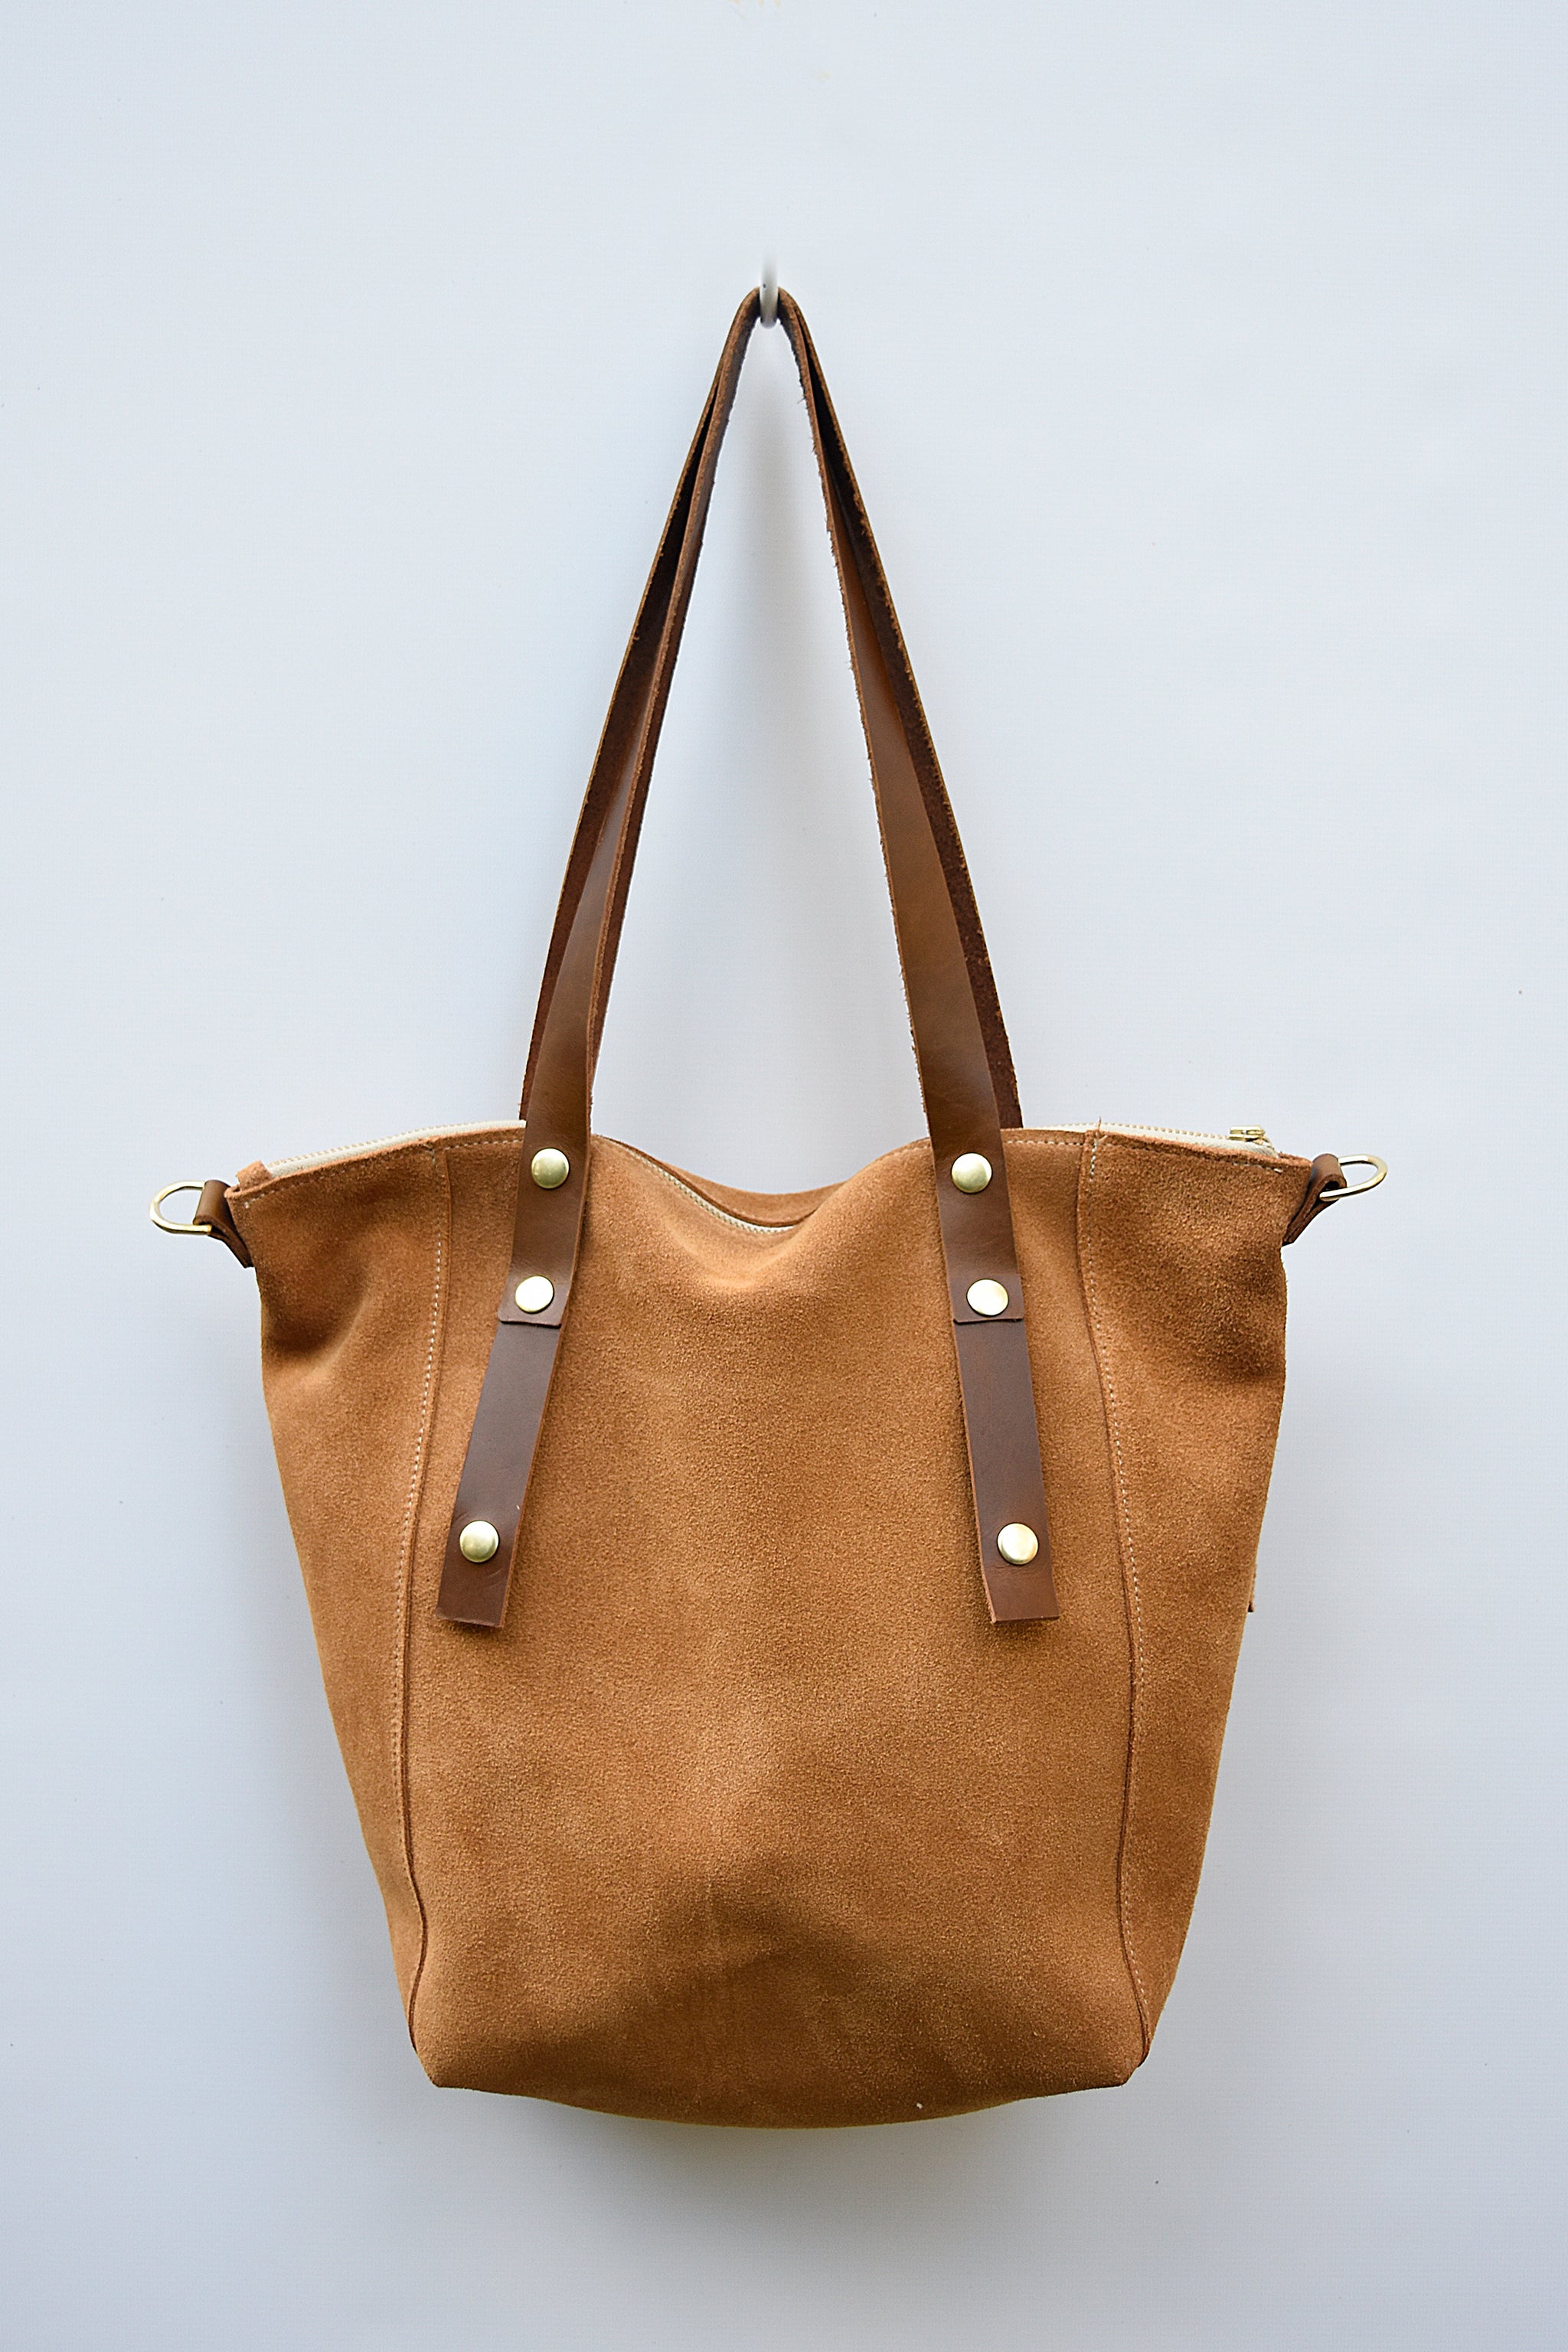 Suede Leather Bag Soft Leather Bag Slouchy Leather Bag -  Israel